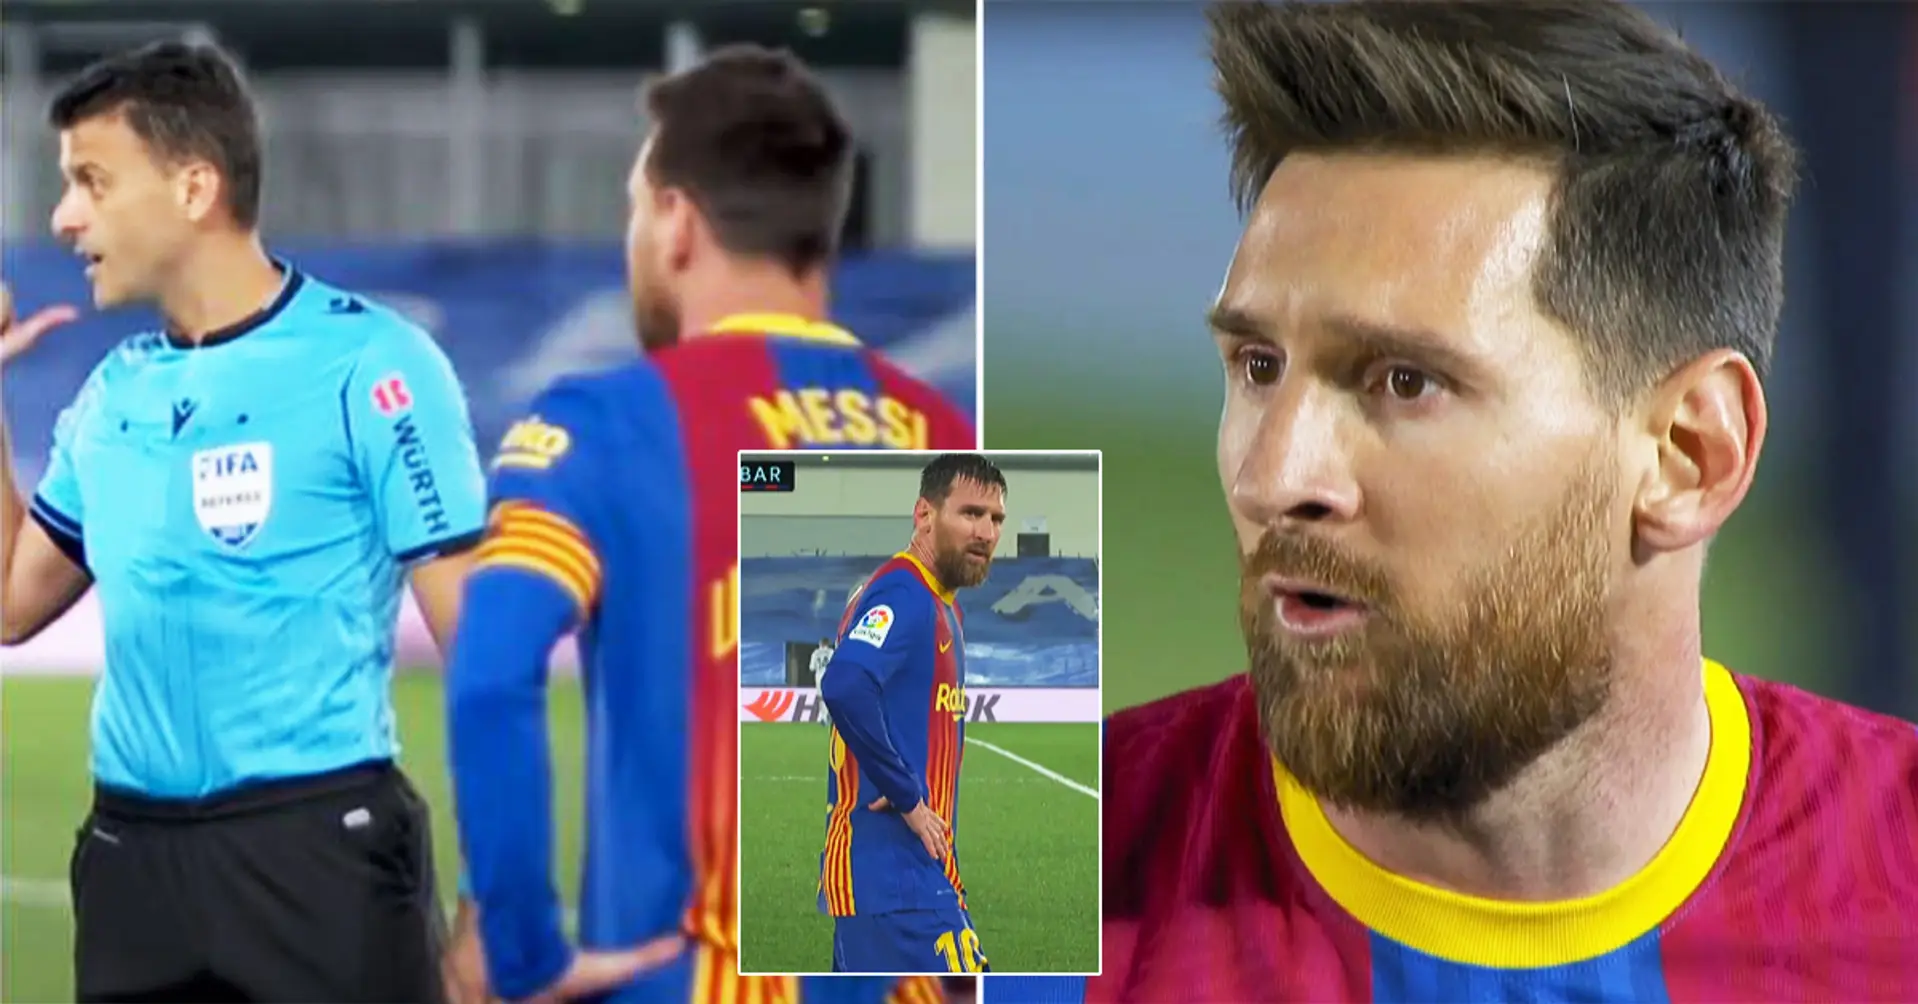 'Speak well': Lionel Messi's conversation with referee during El Clasico revealed by reporters